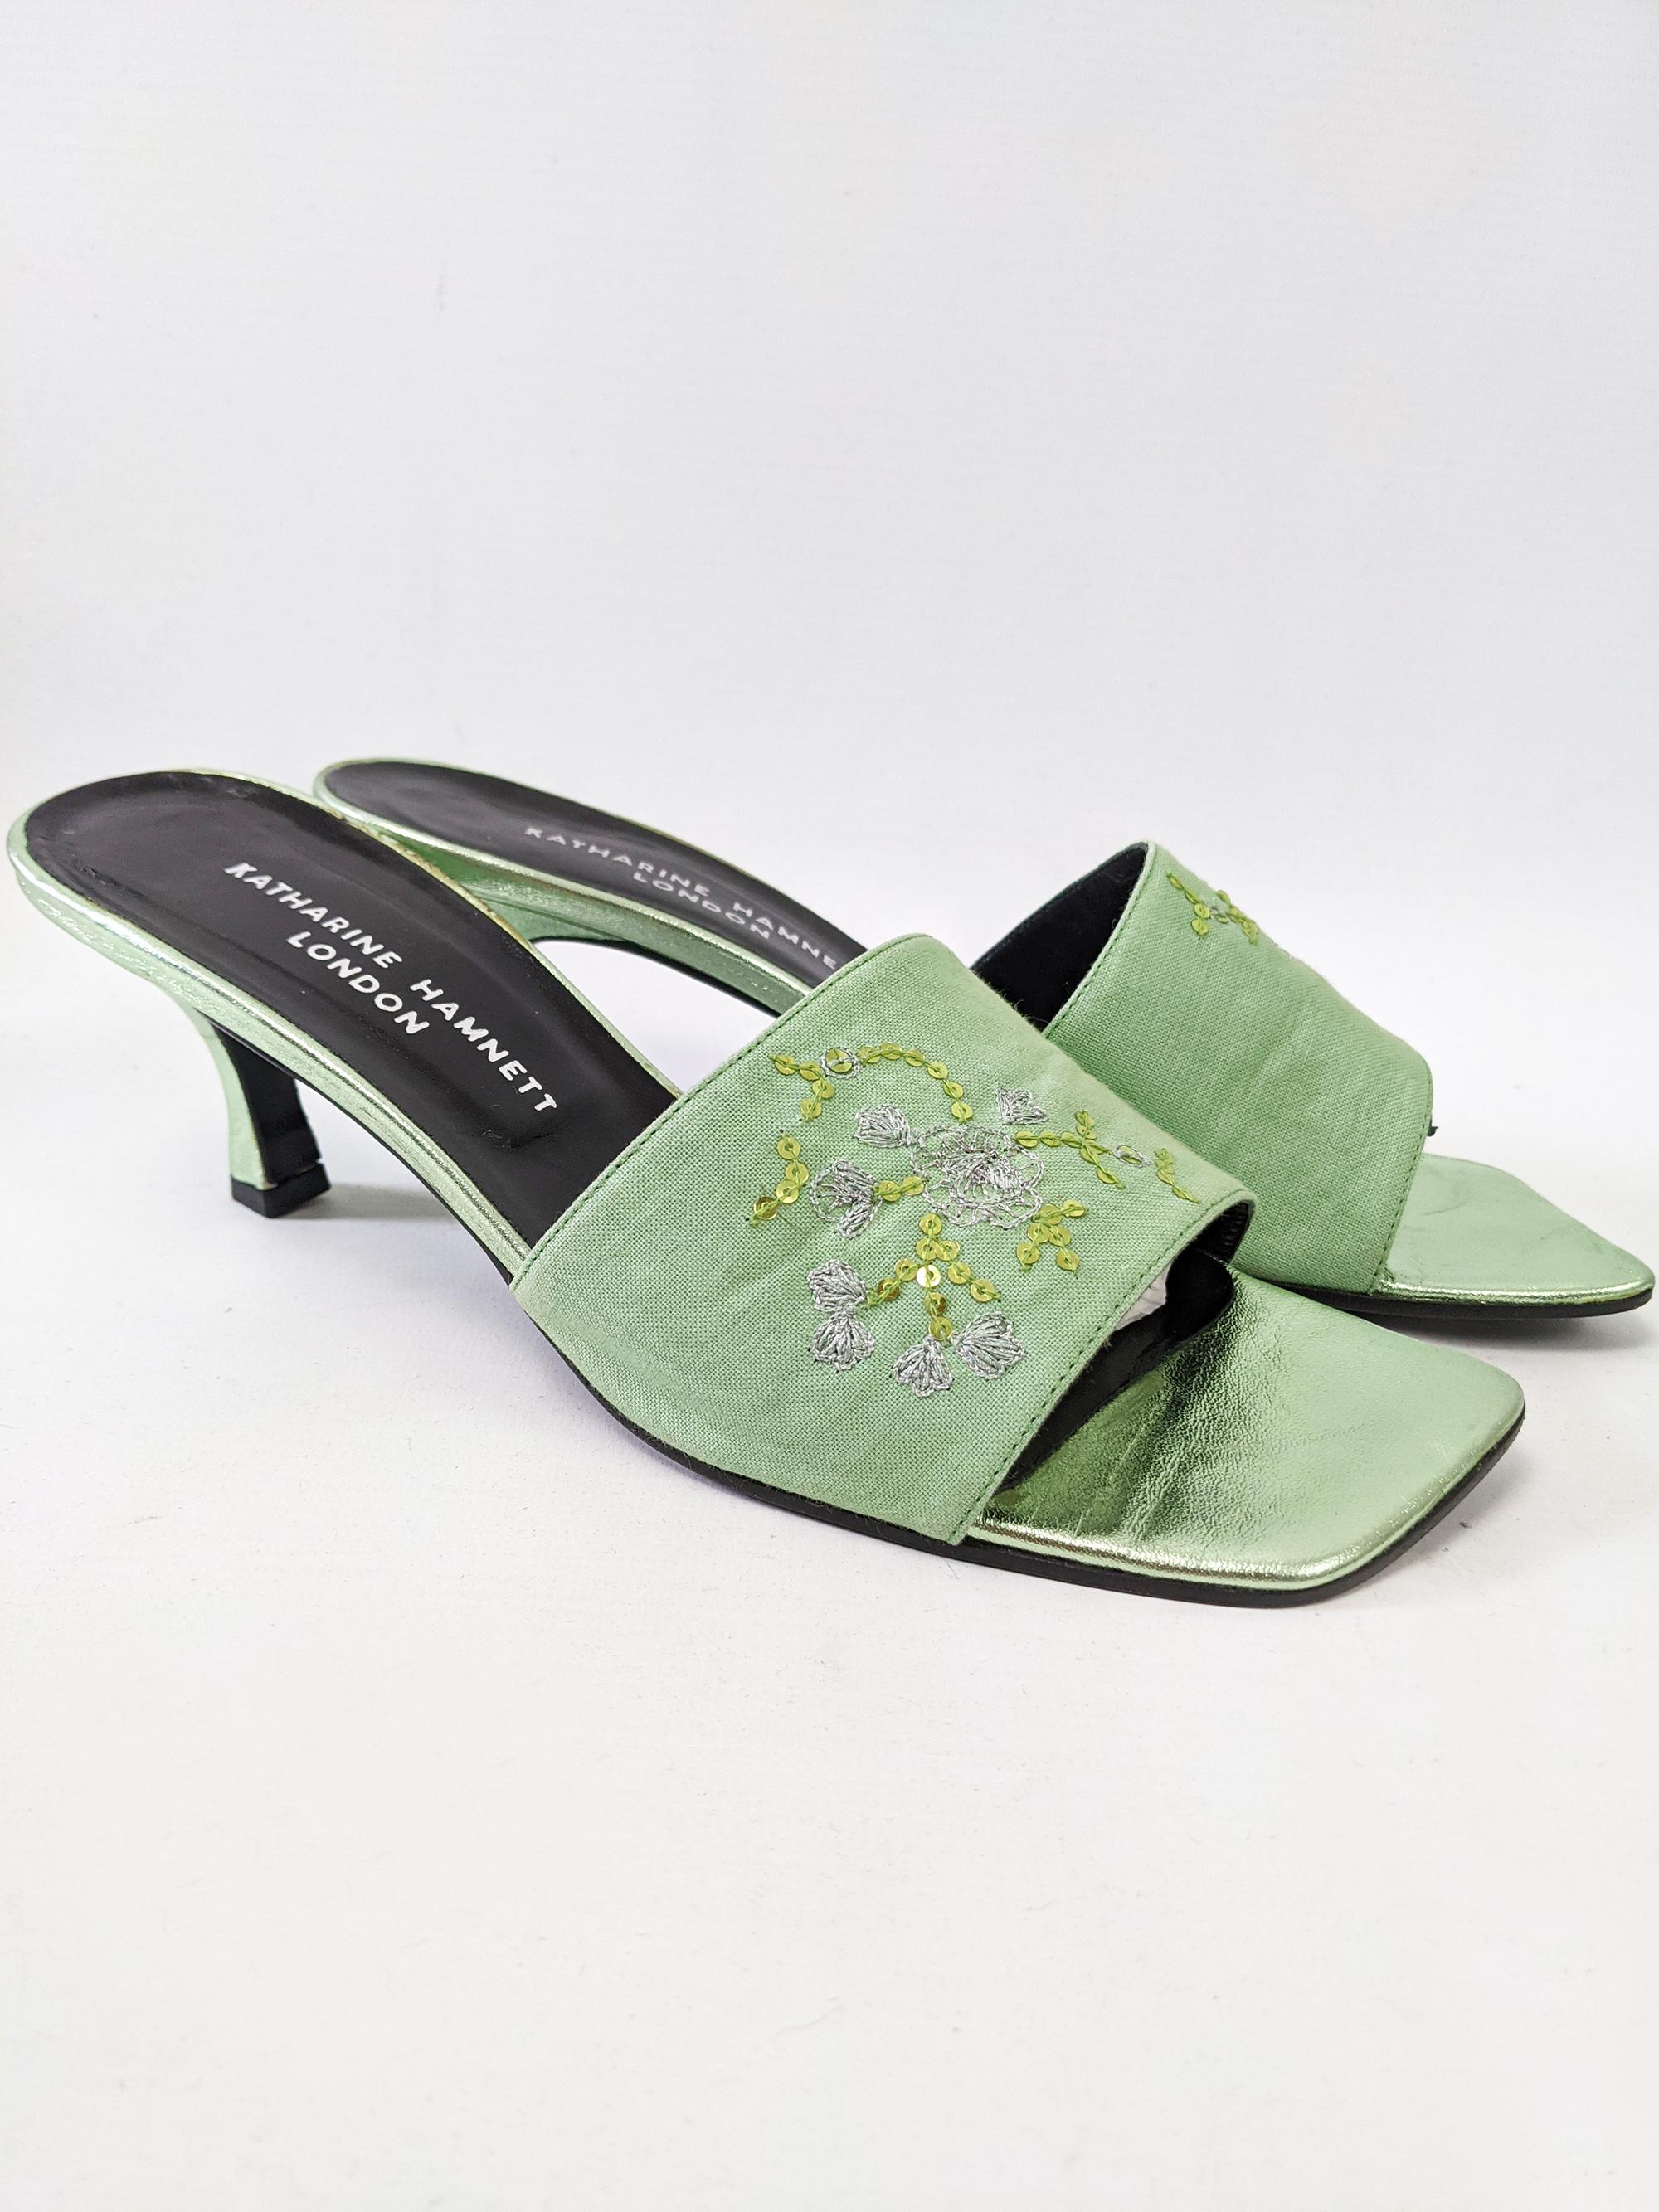 A stunning pair of vintage low heel mules from the late 90s by luxury British fashion designer, Katherine Hamnett.  Made in Italy, from a green leather with a wide cotton strap and beautiful sequin and embroidery detailing. 

Size: Marked IT